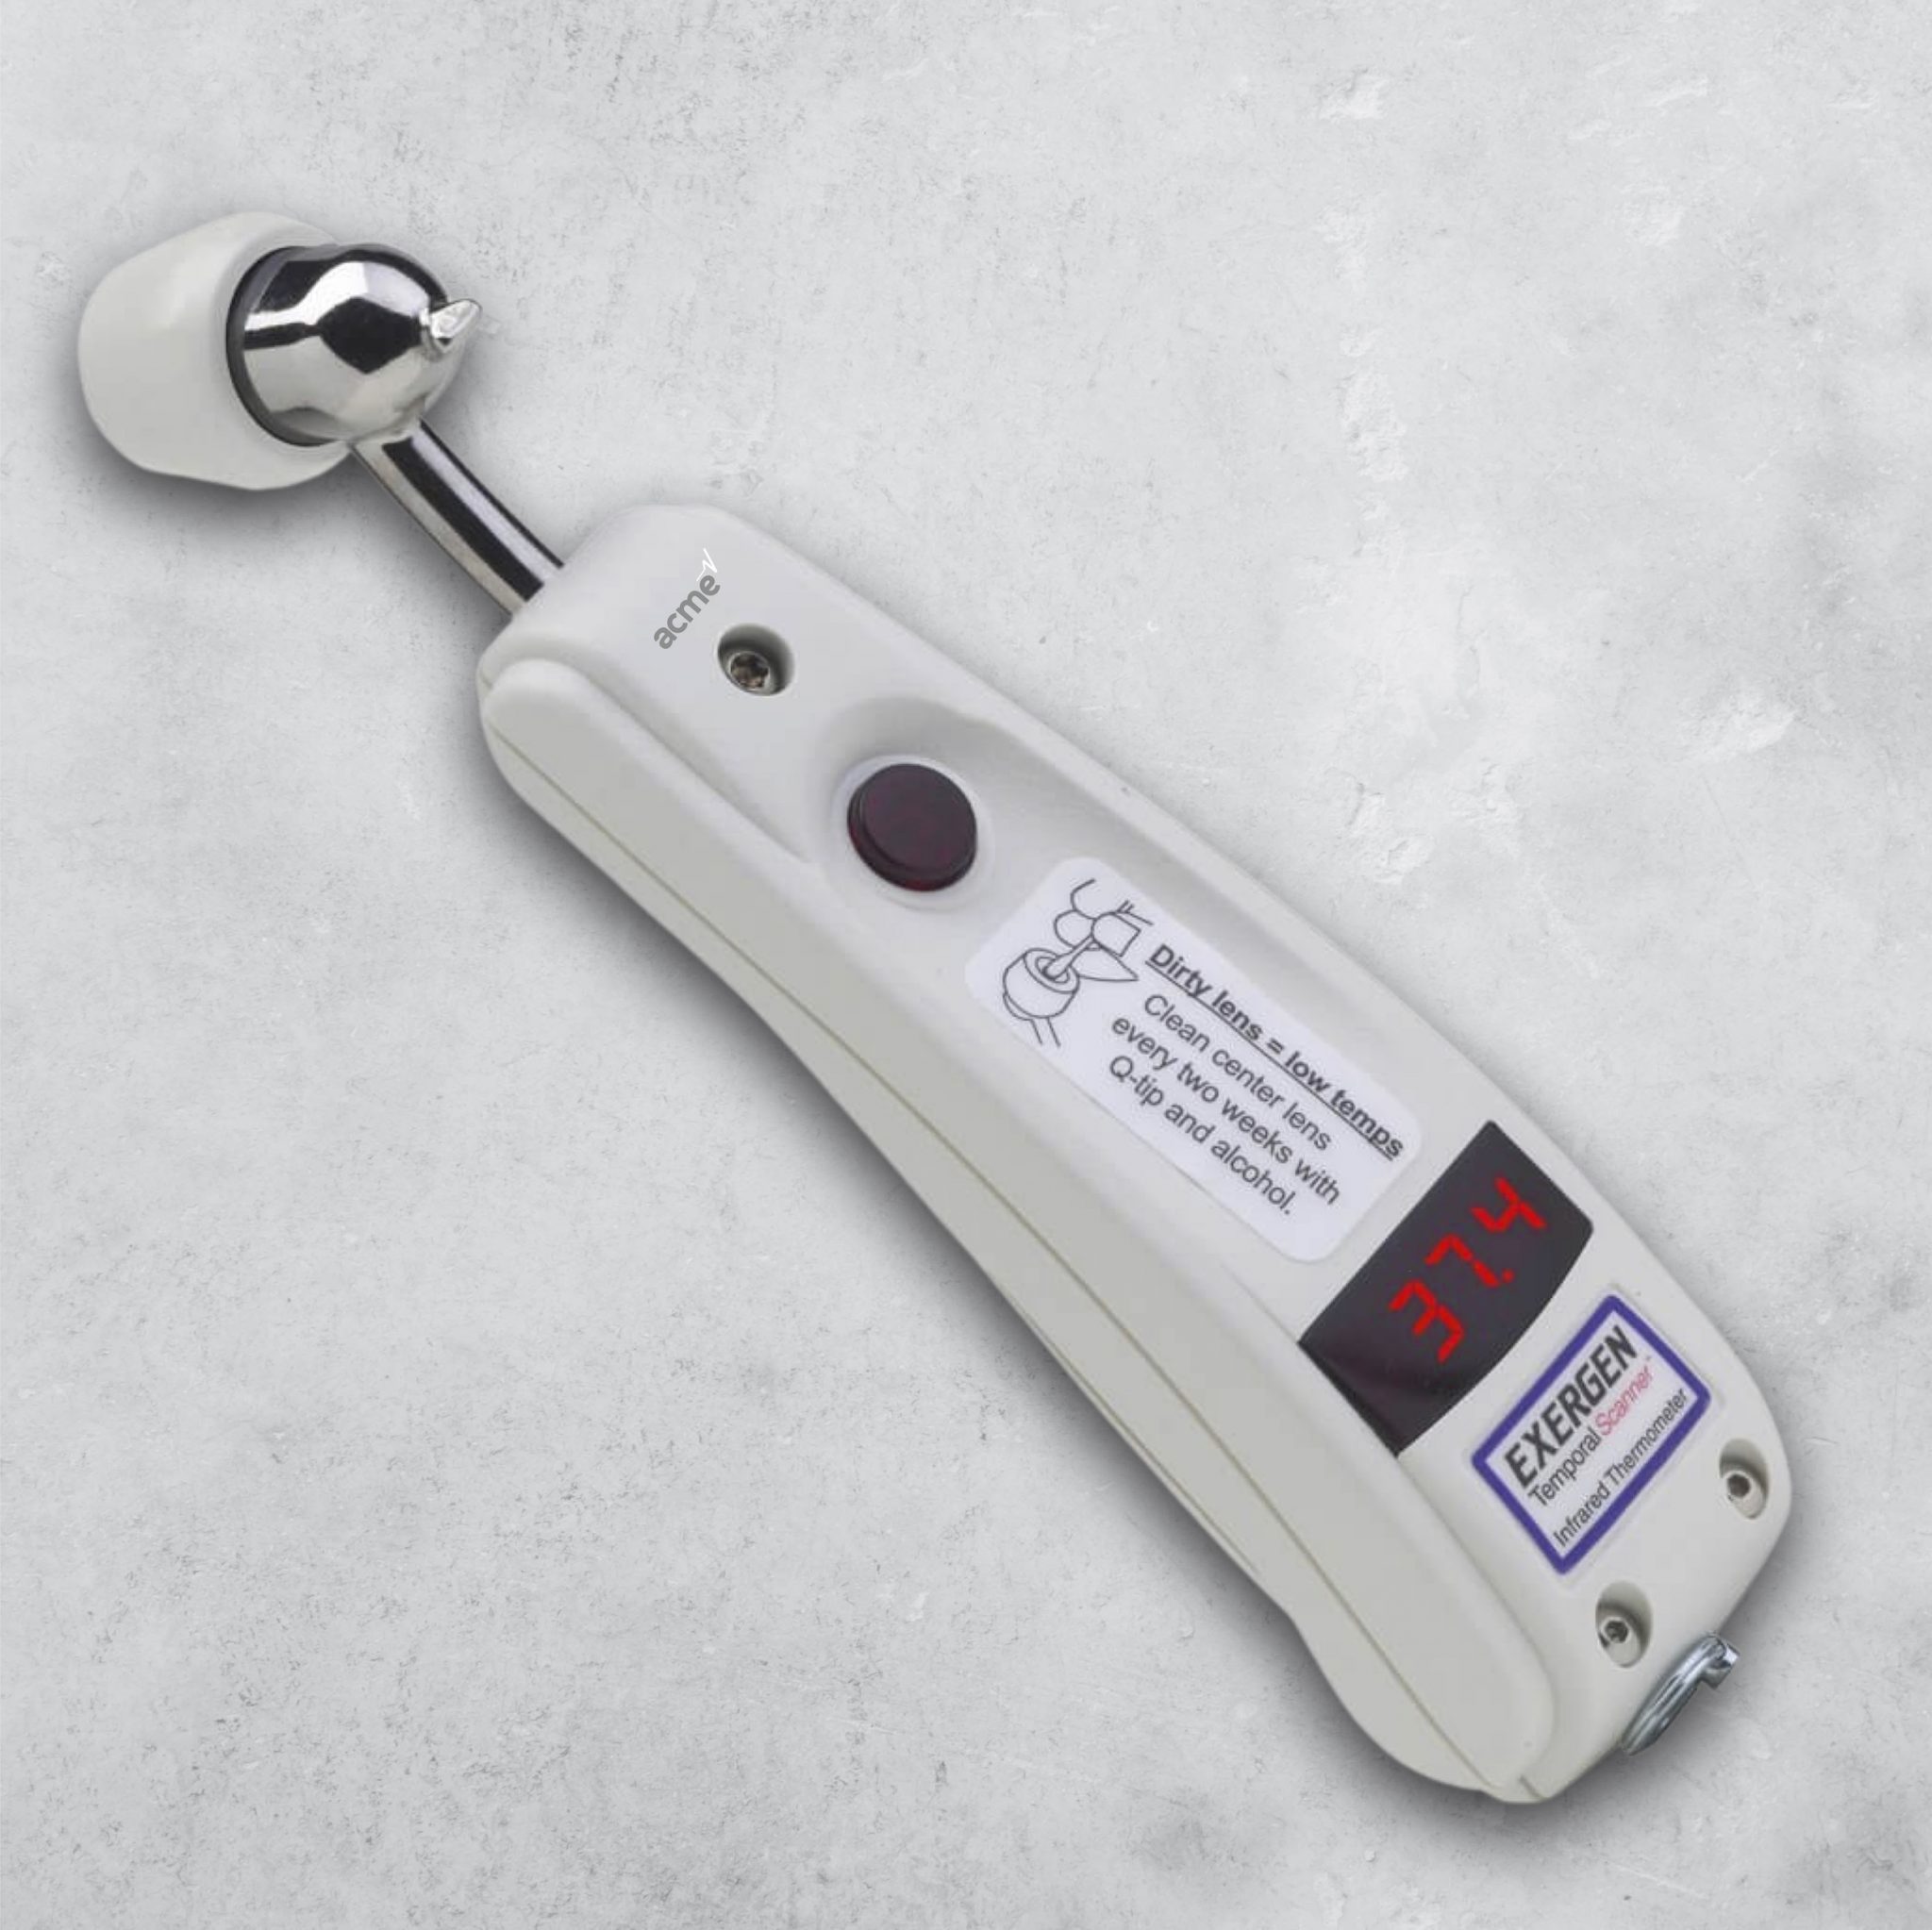 exergen-professional-tat-5000-temporal-thermometer-for-sale